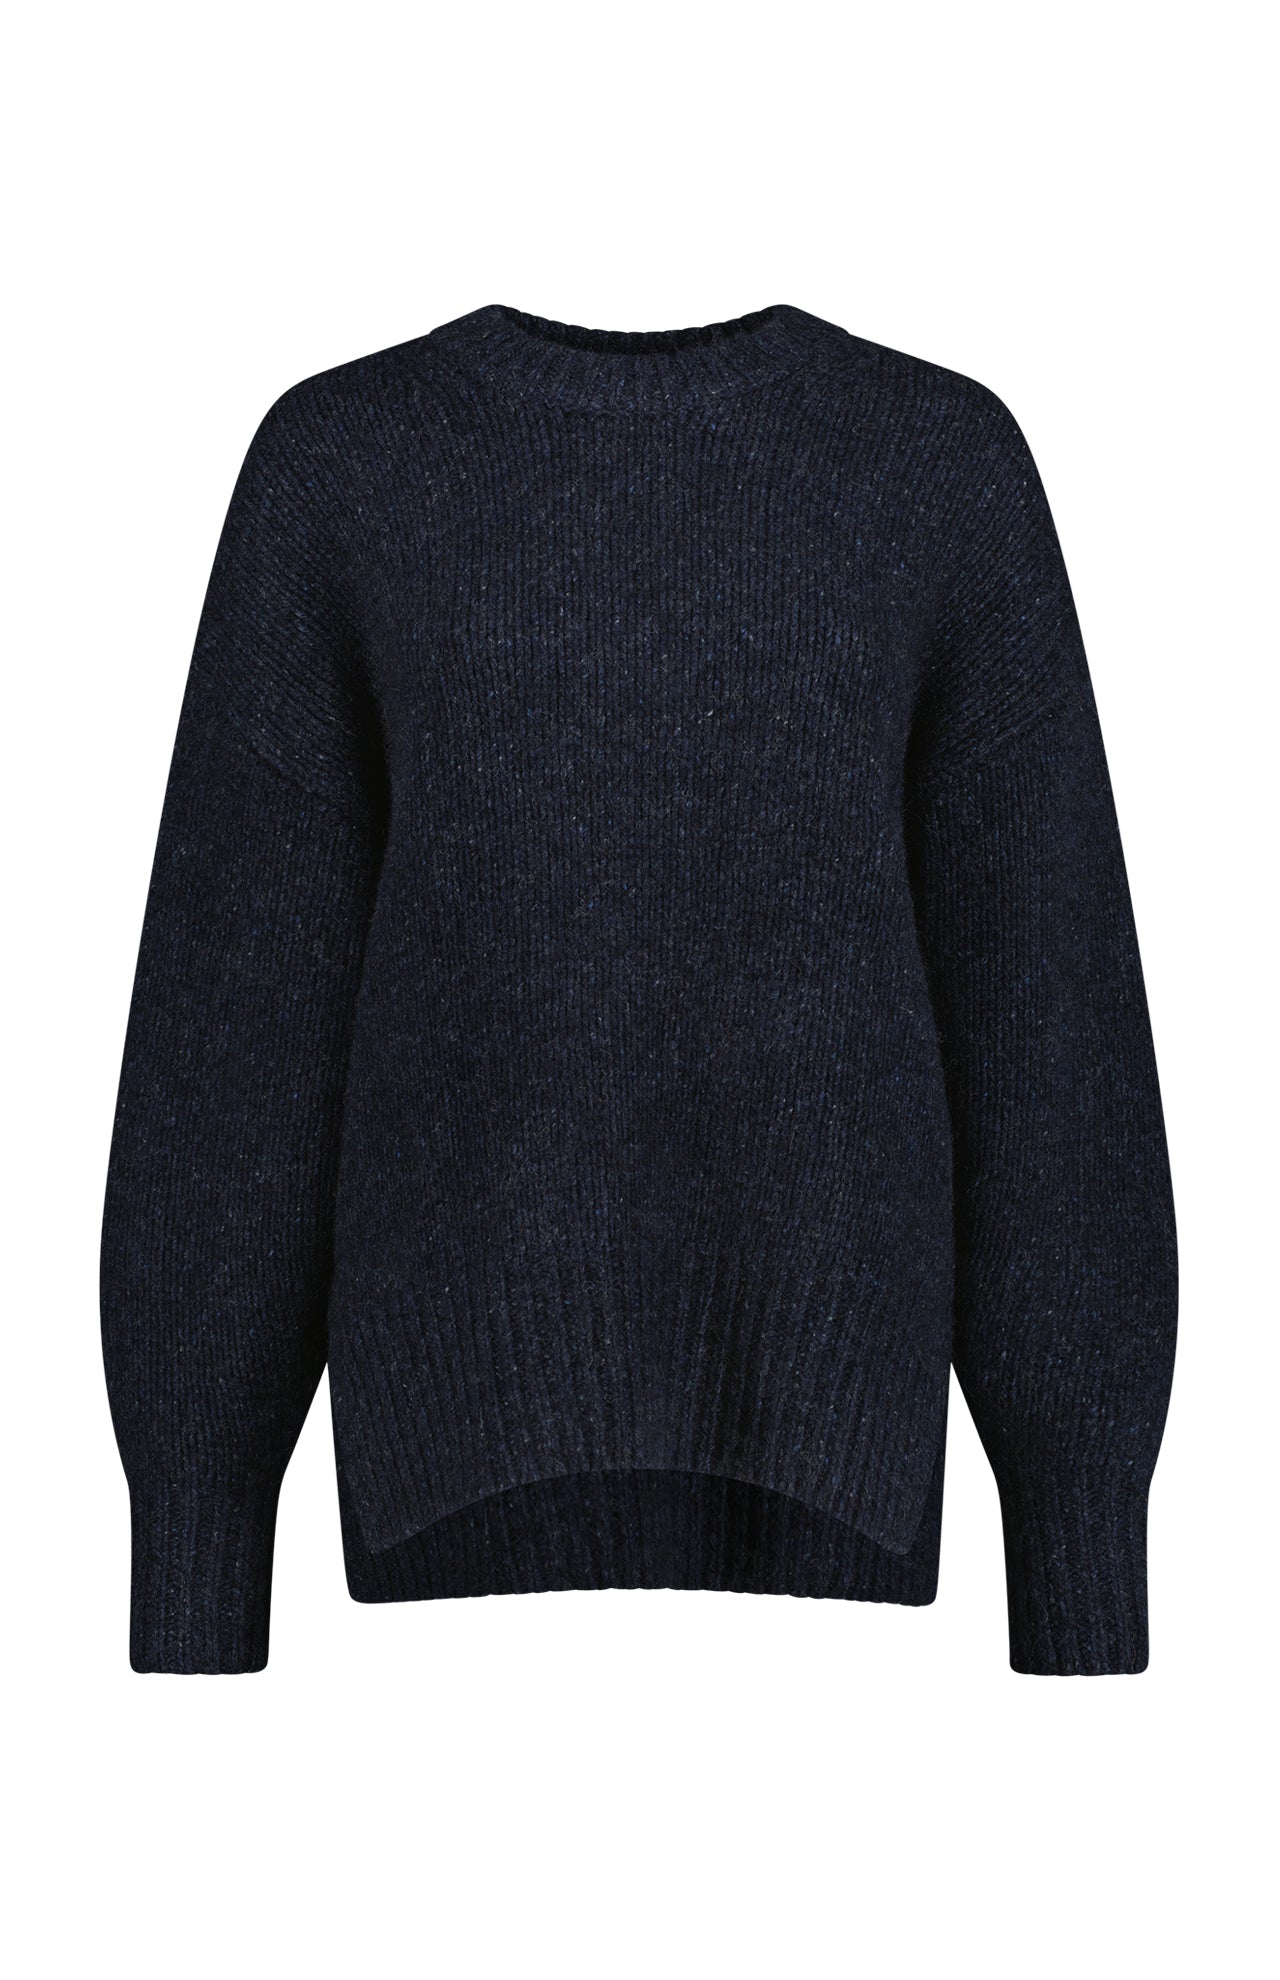 Donegal Cashmere Luxe Crewneck (7254356689011)